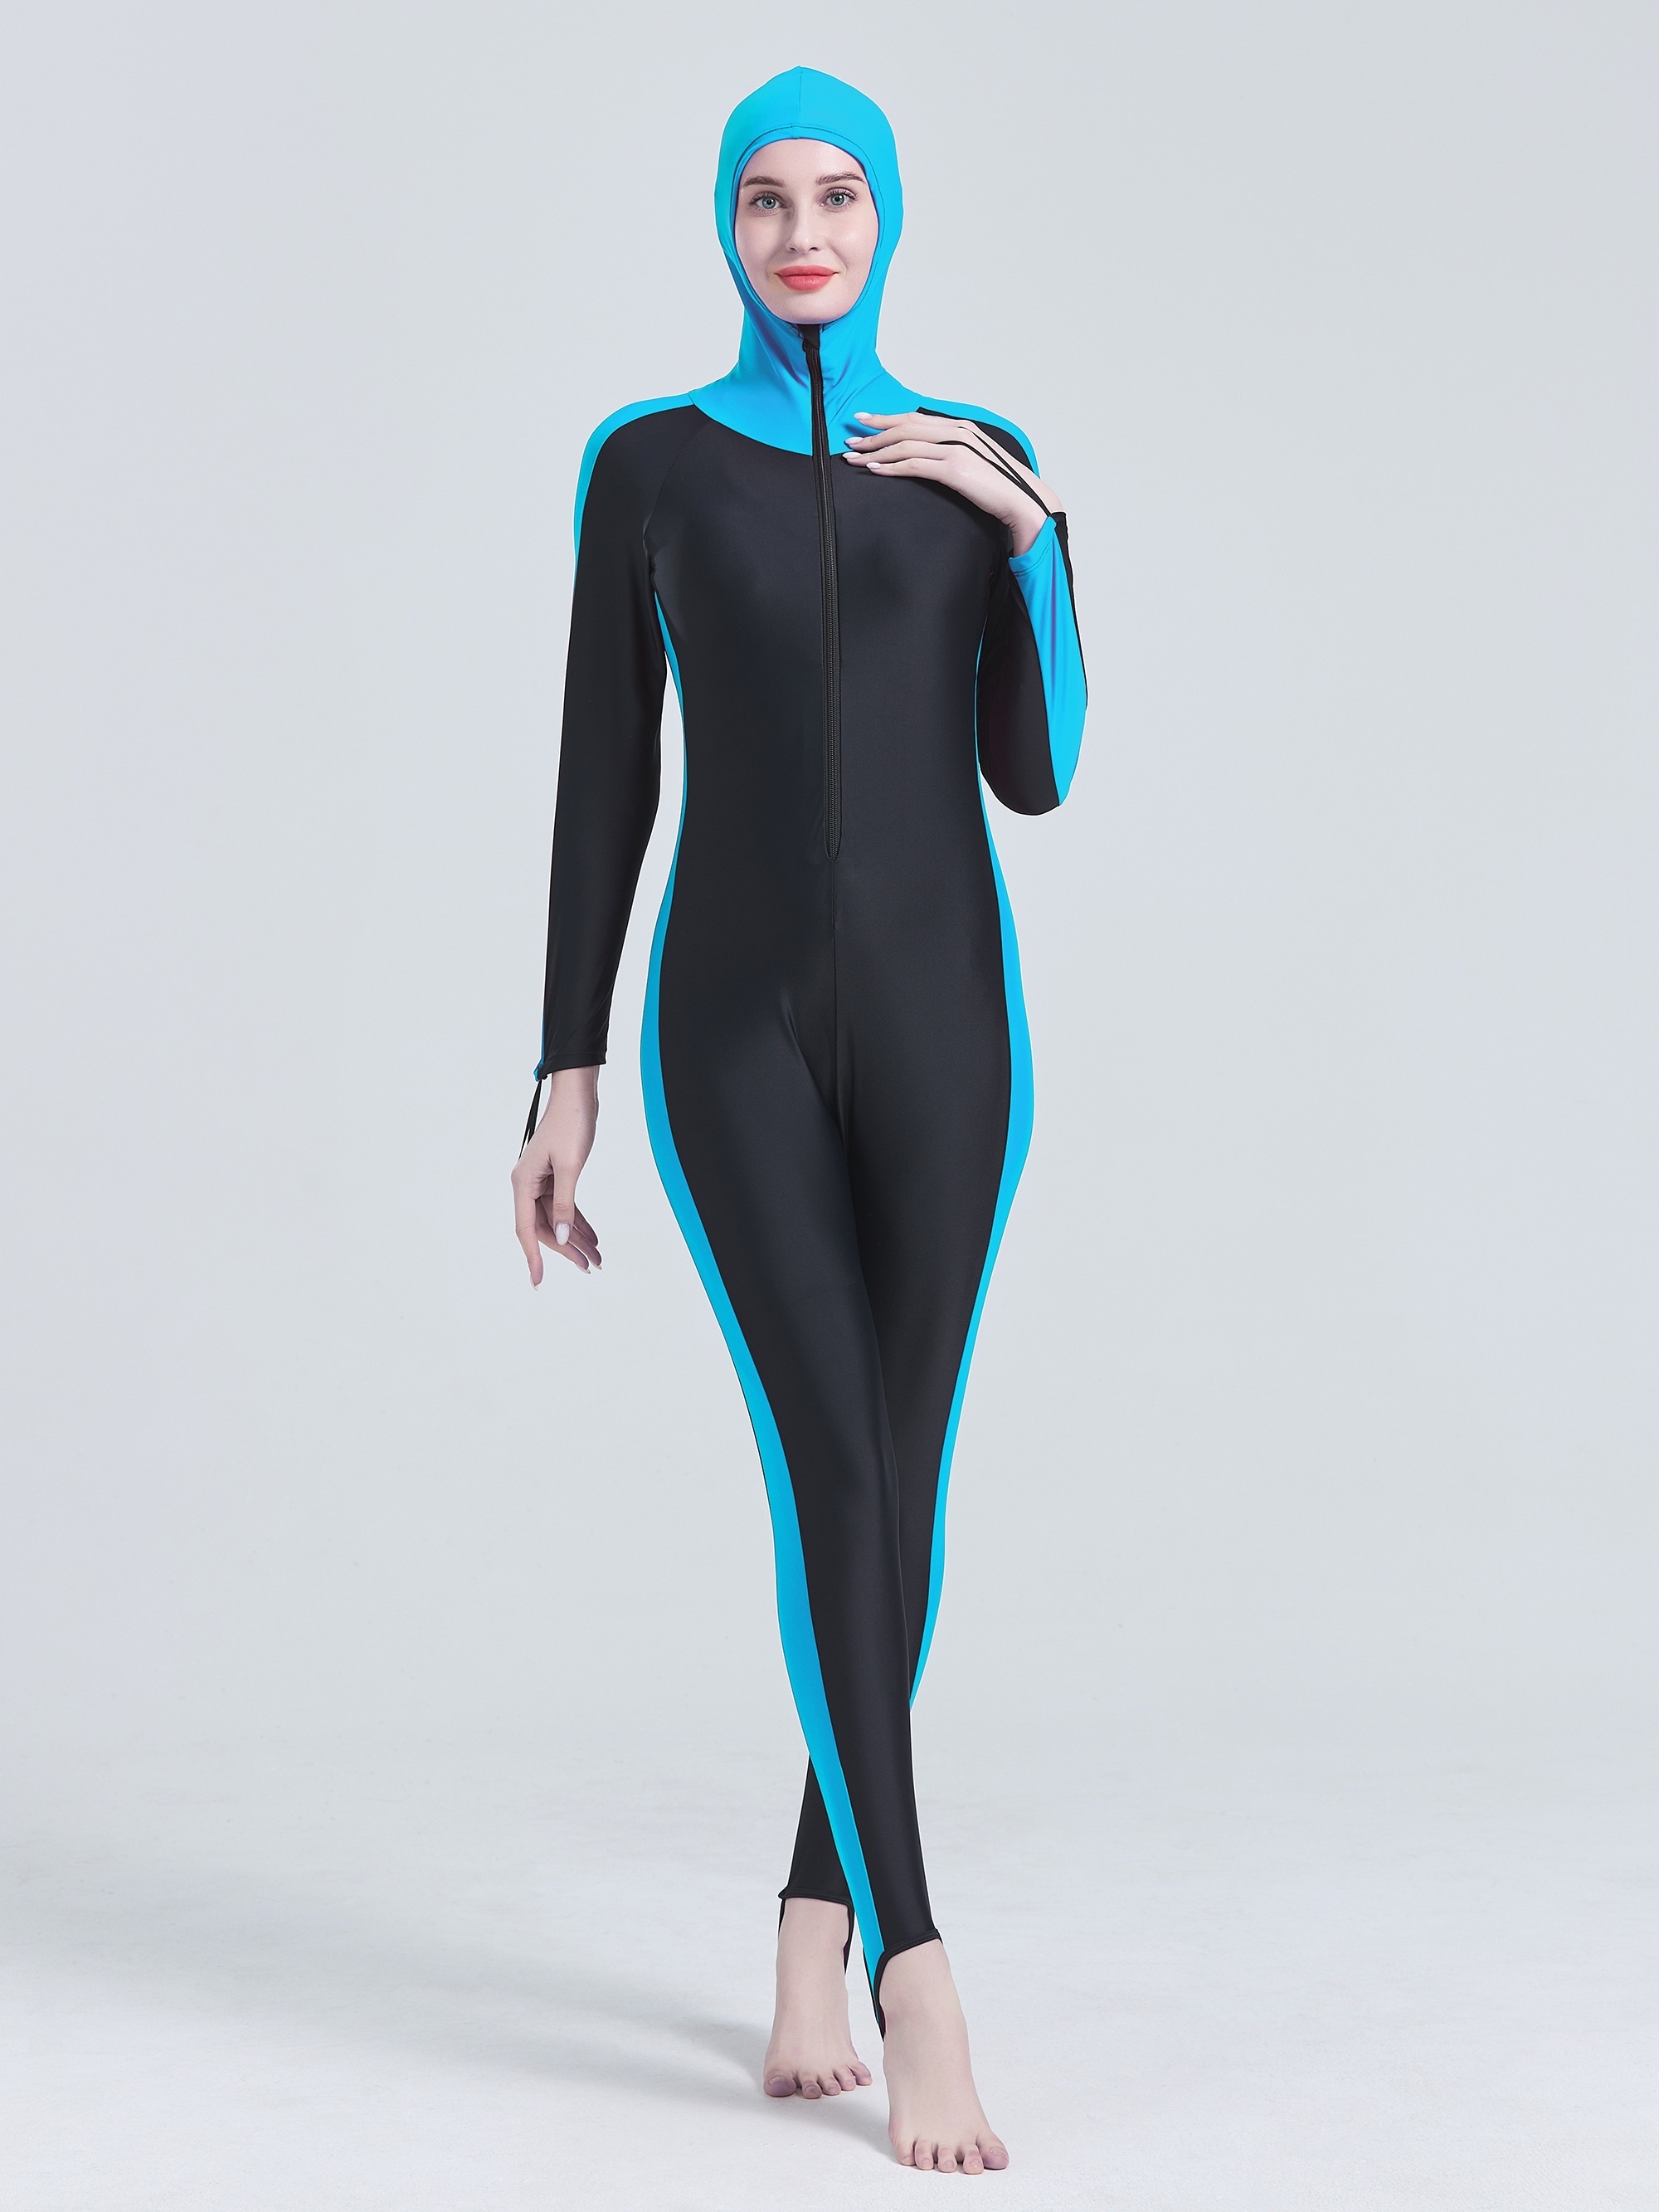 * Women's Hooded Hijab Style Swimwear with Long Sleeves and Belted Legs -  Colorblock Bathing Suit for Modest Coverage and Sun Protection